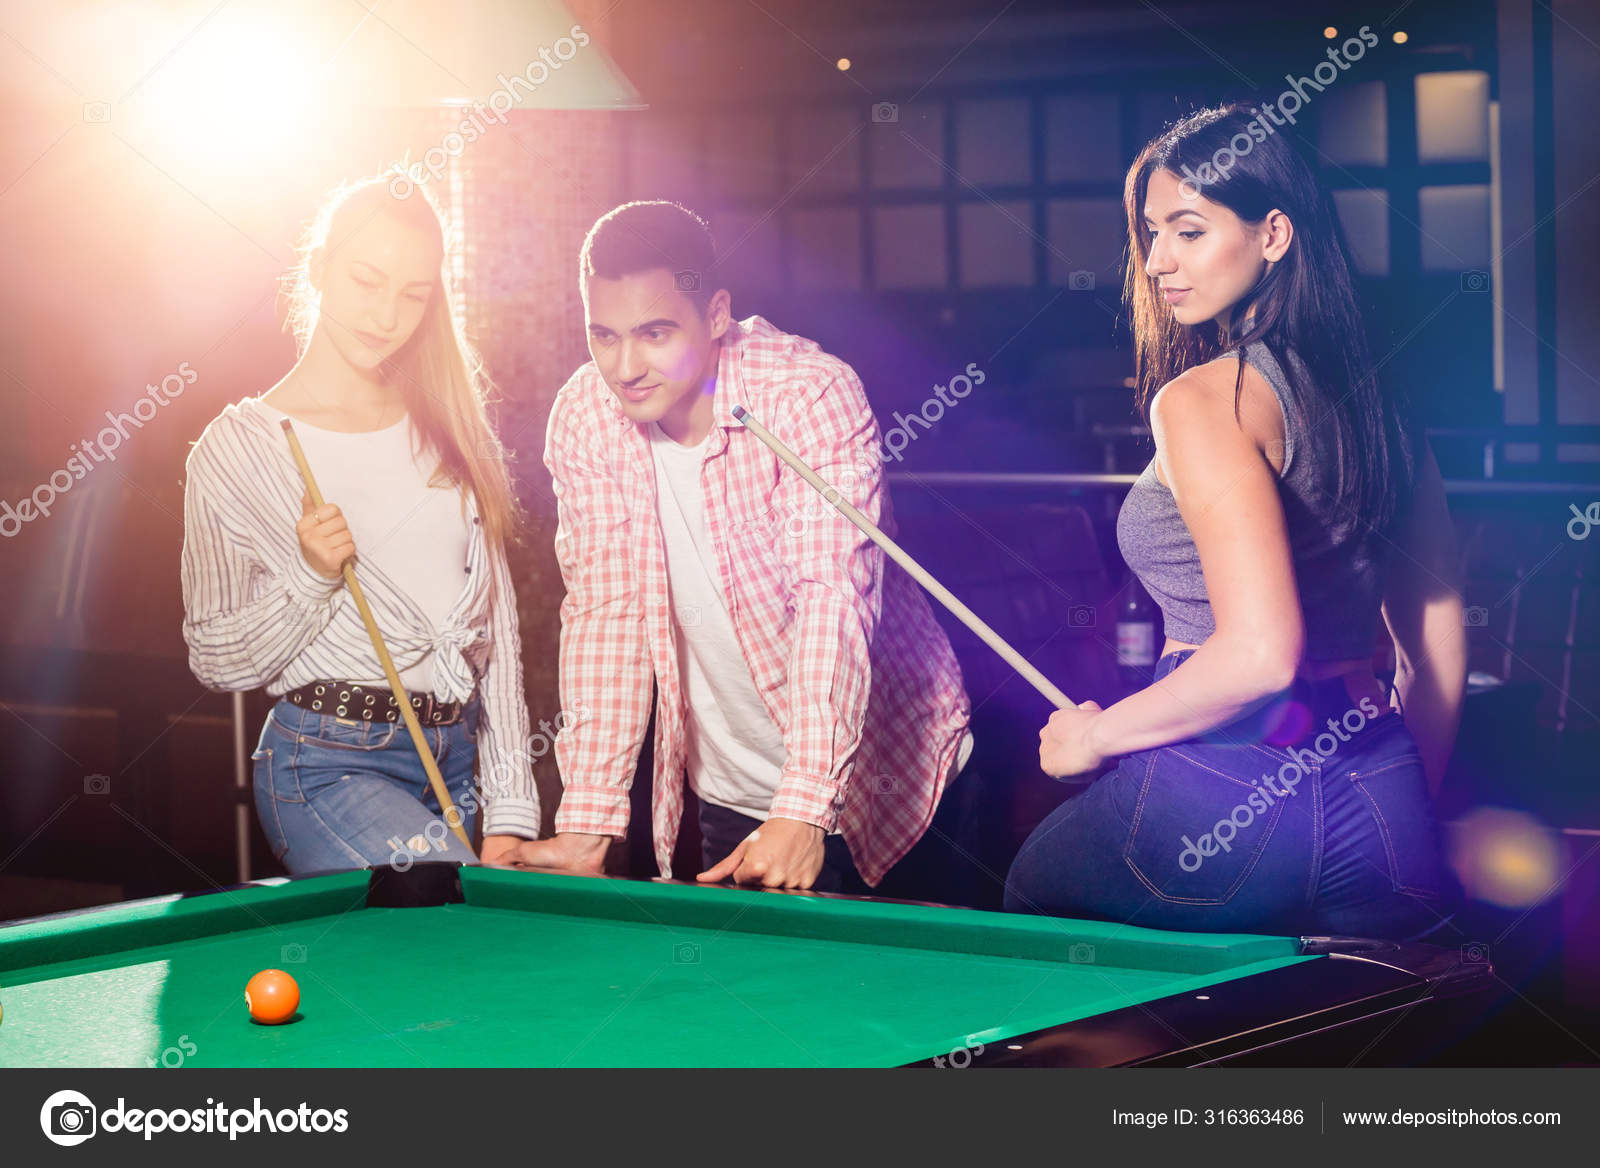 Group Young Cheerful Friends Playing Billiards Funny Time Work Stock Photo  by ©Romaset 316360520